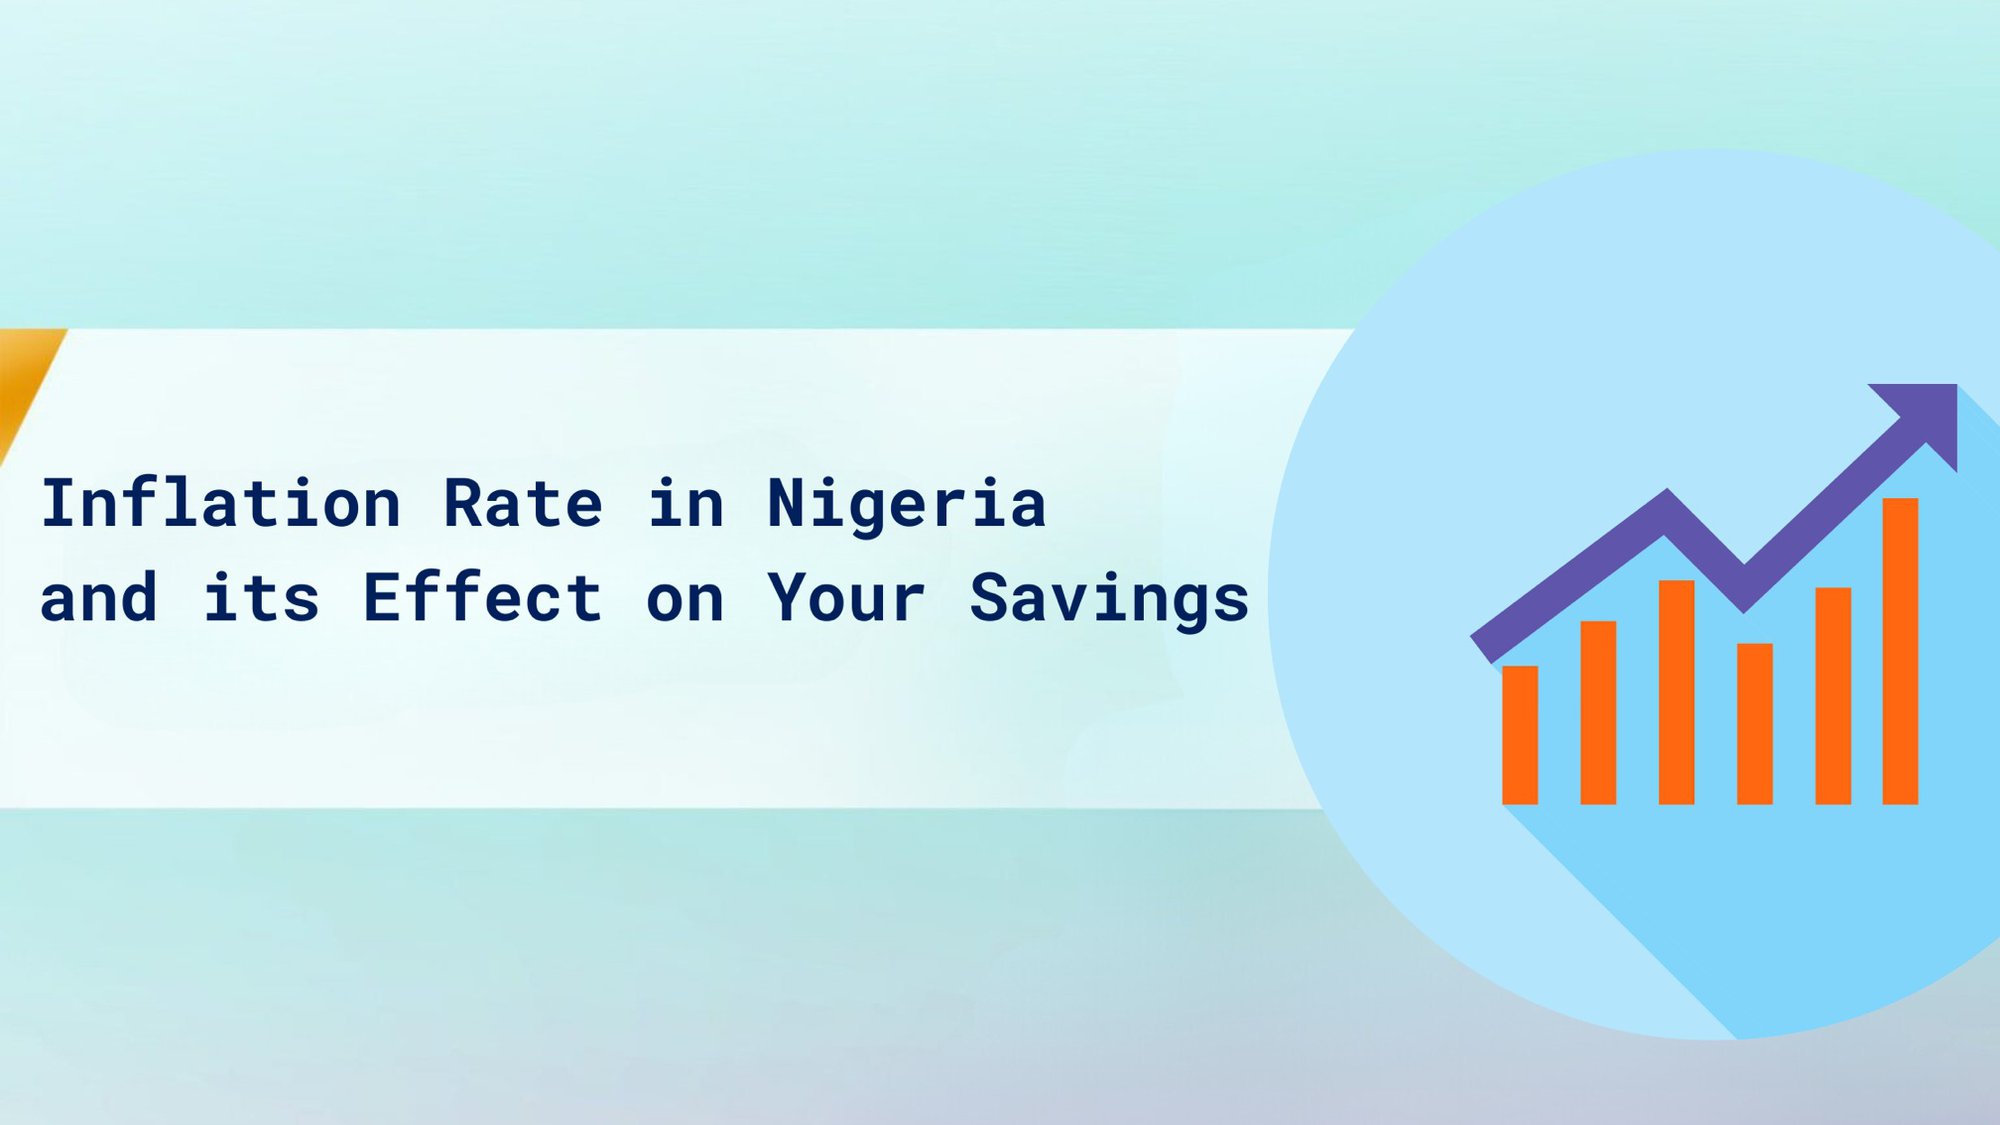 Inflation Rate in Nigeria Today and its Effect on Your Savings